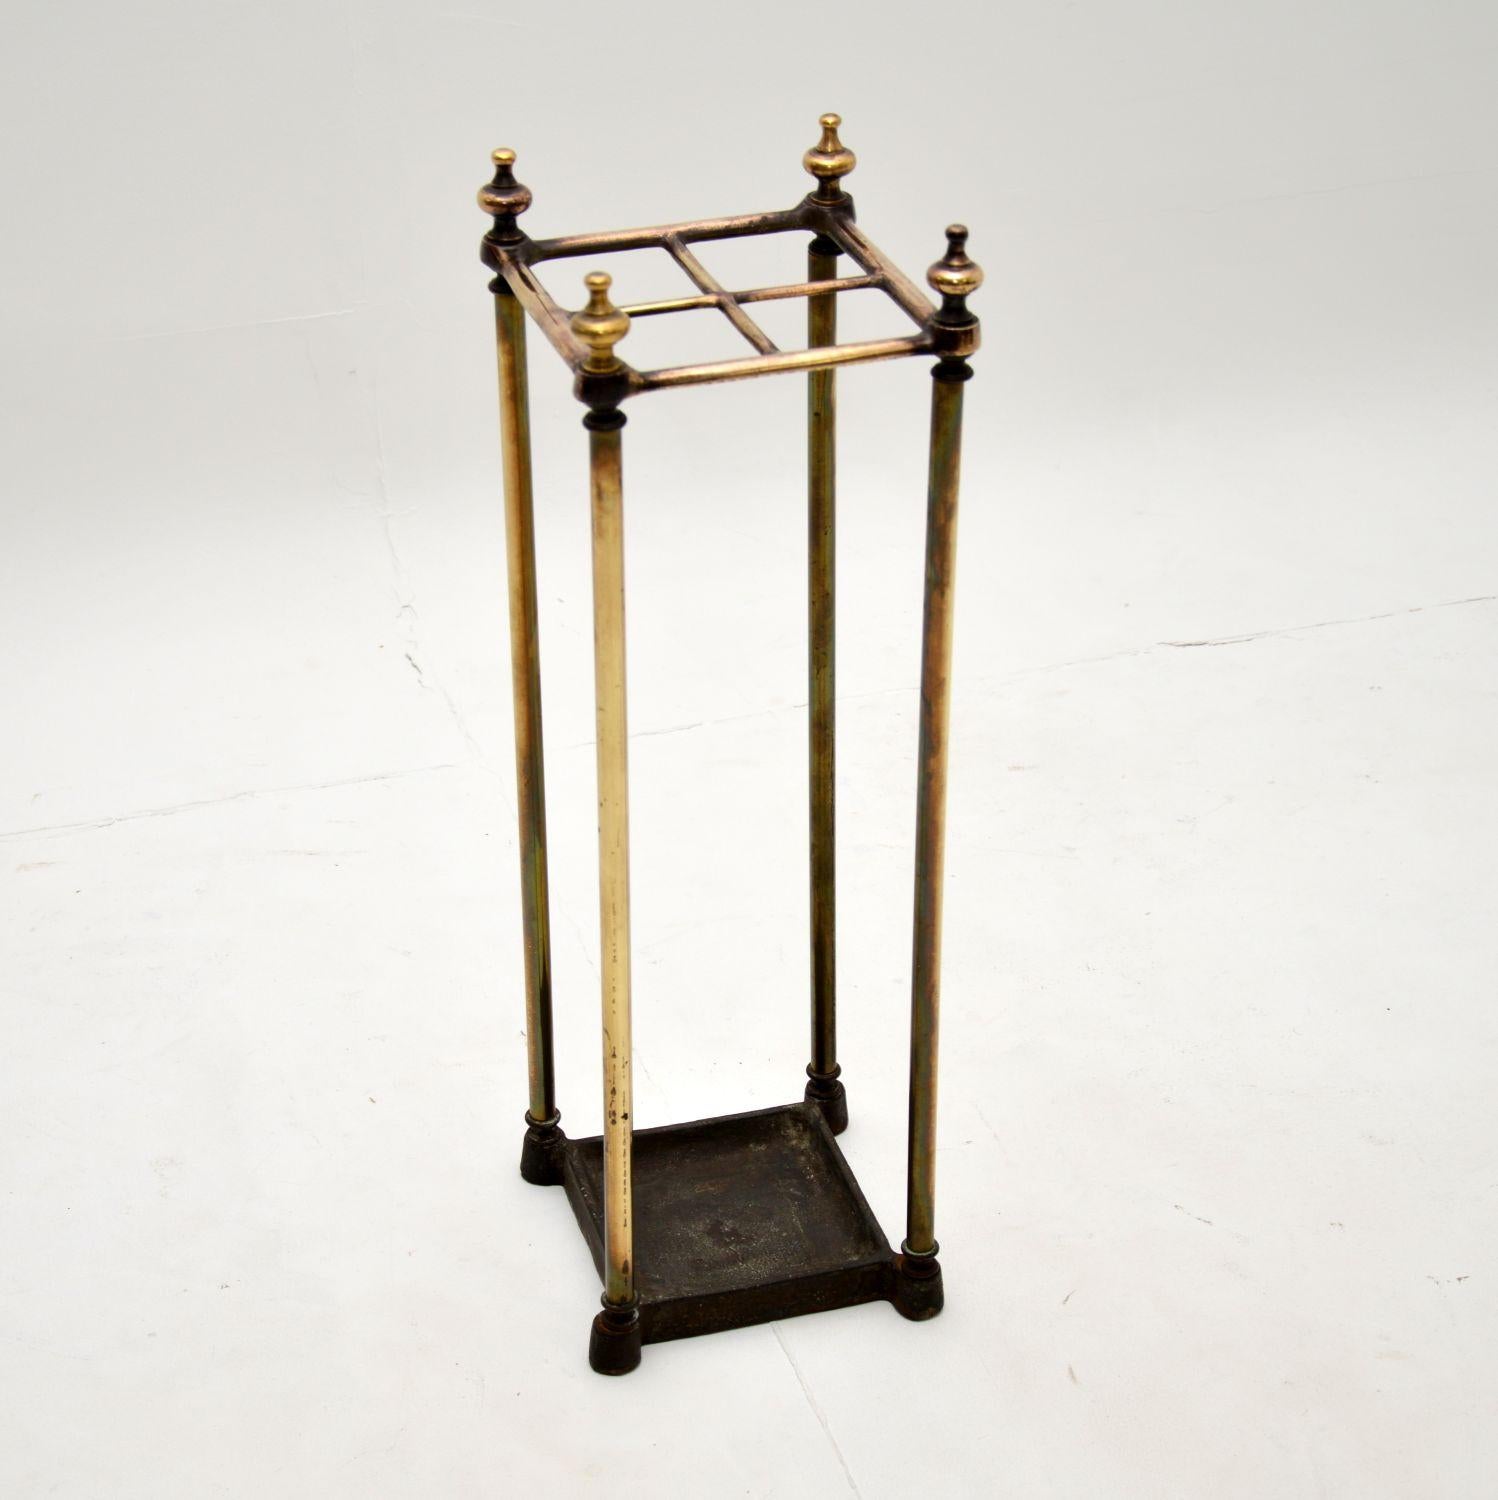 A charming original antique Victorian umbrella stand in solid brass. This was made in England, it dates from around the 1860-1880 period.

The quality is amazing, this is mostly solid brass throughout, with a cast iron base.

It is in lovely